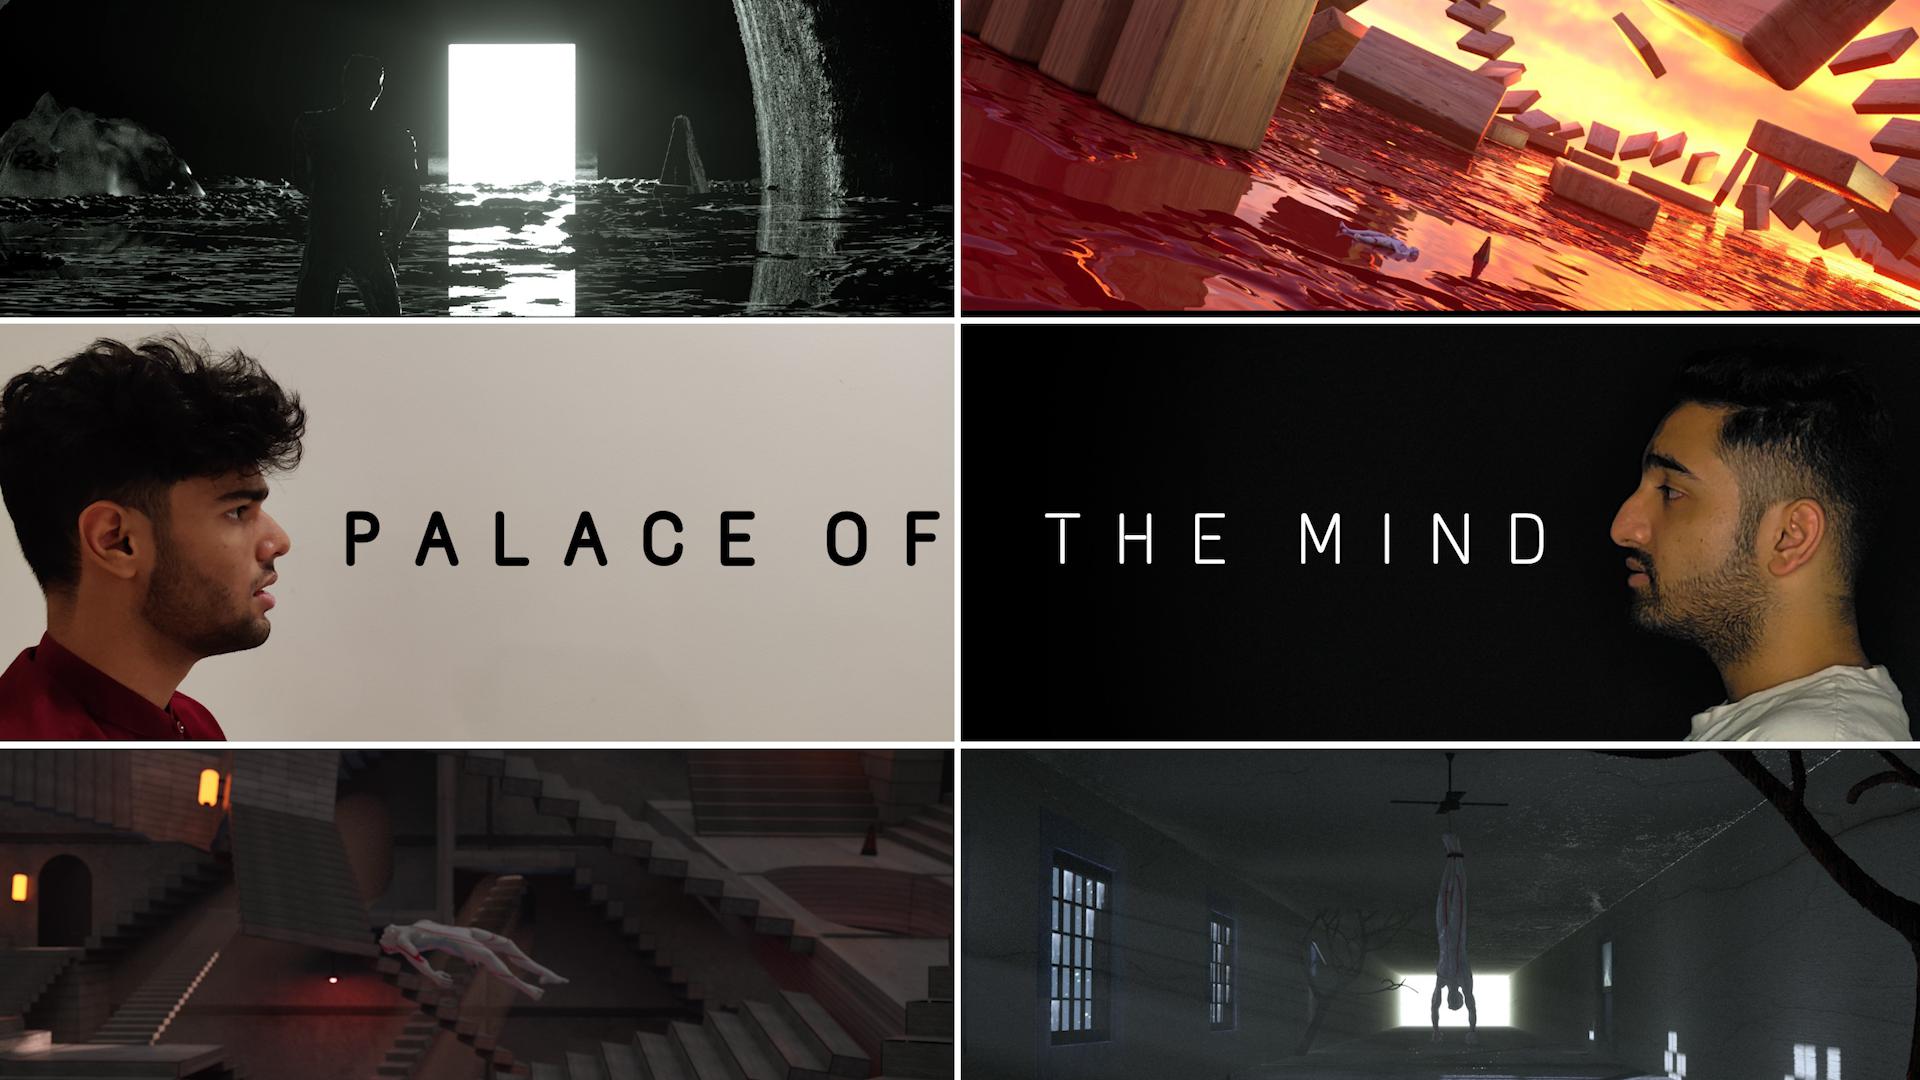 Palace of the mind